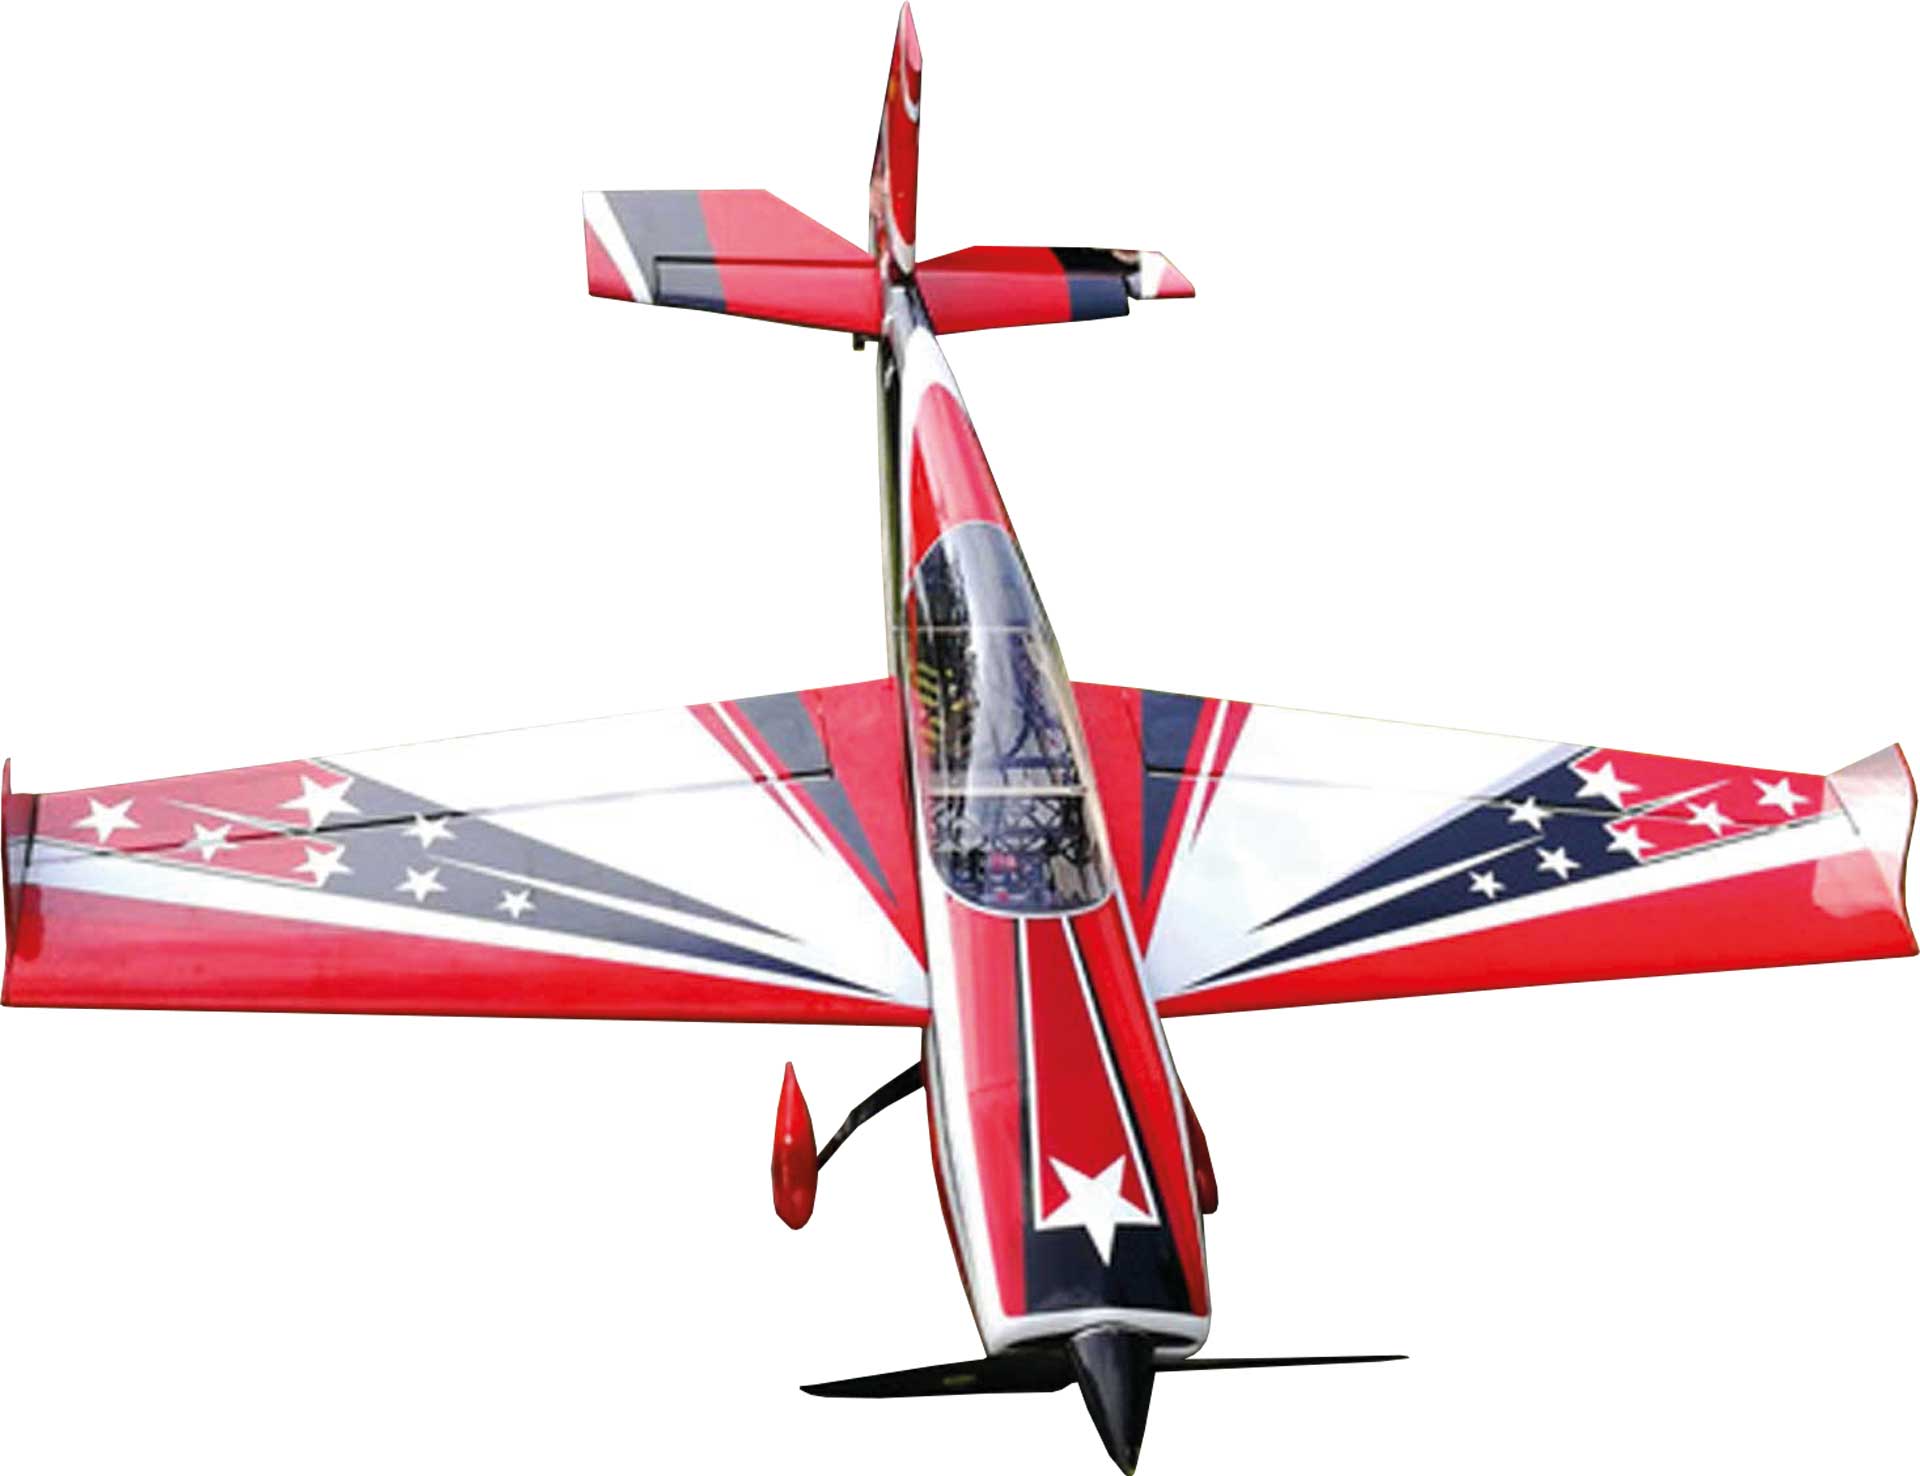 EXTREMEFLIGHT-RC EXTRA 300 78" V3 Plus red / black ARF with quick release wing latching mechanism